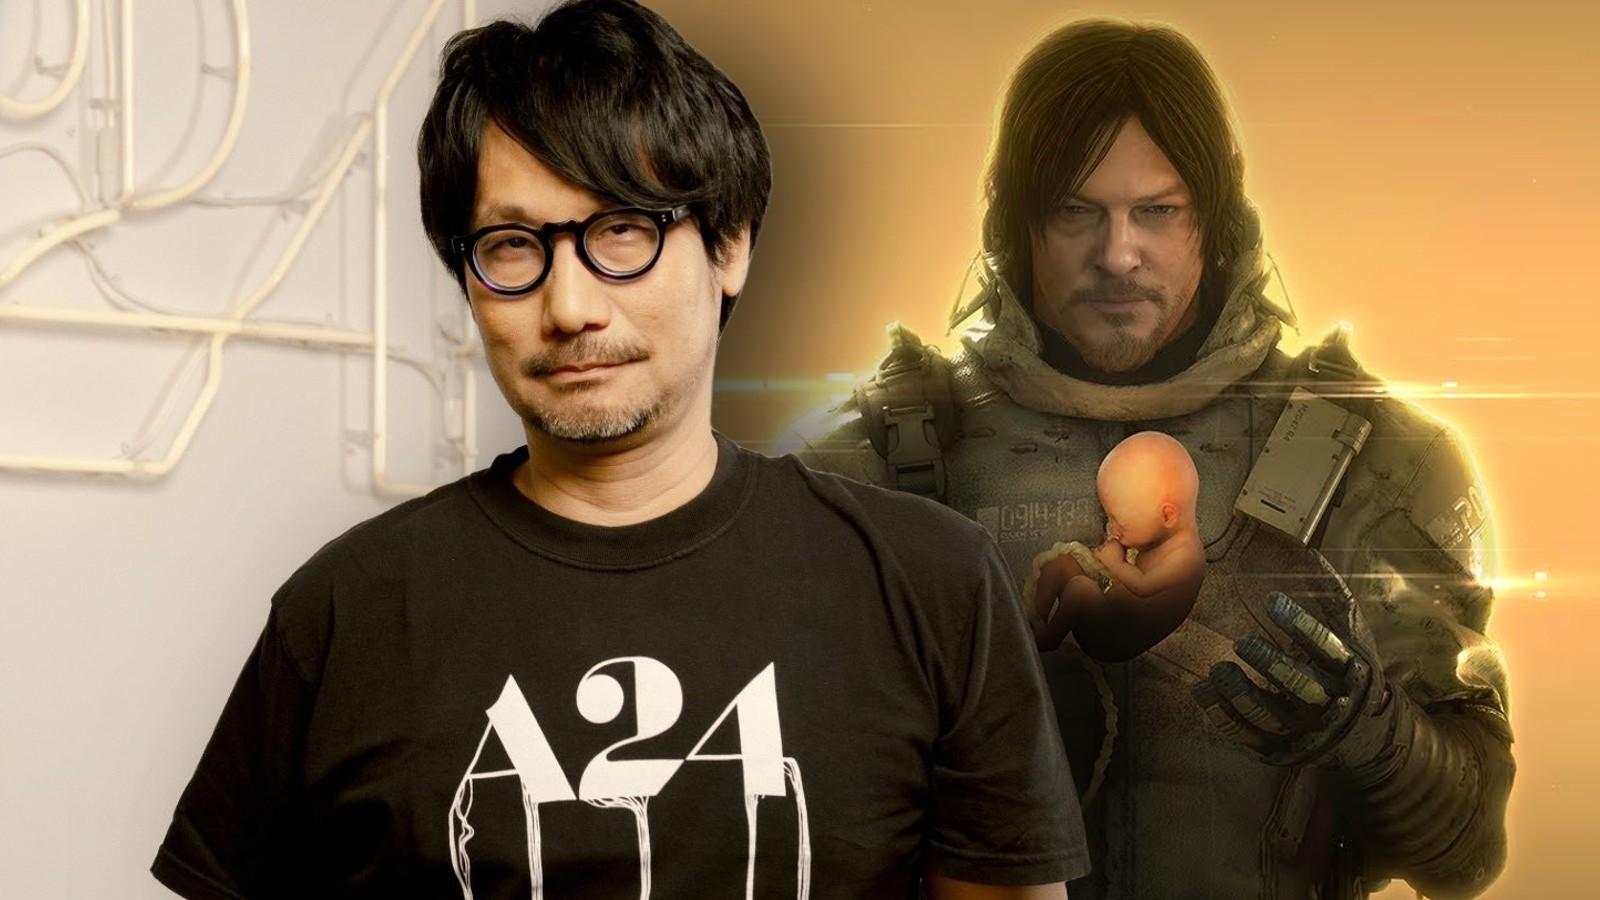 Hideo Kojima in an A24 top and an image from Death Stranding